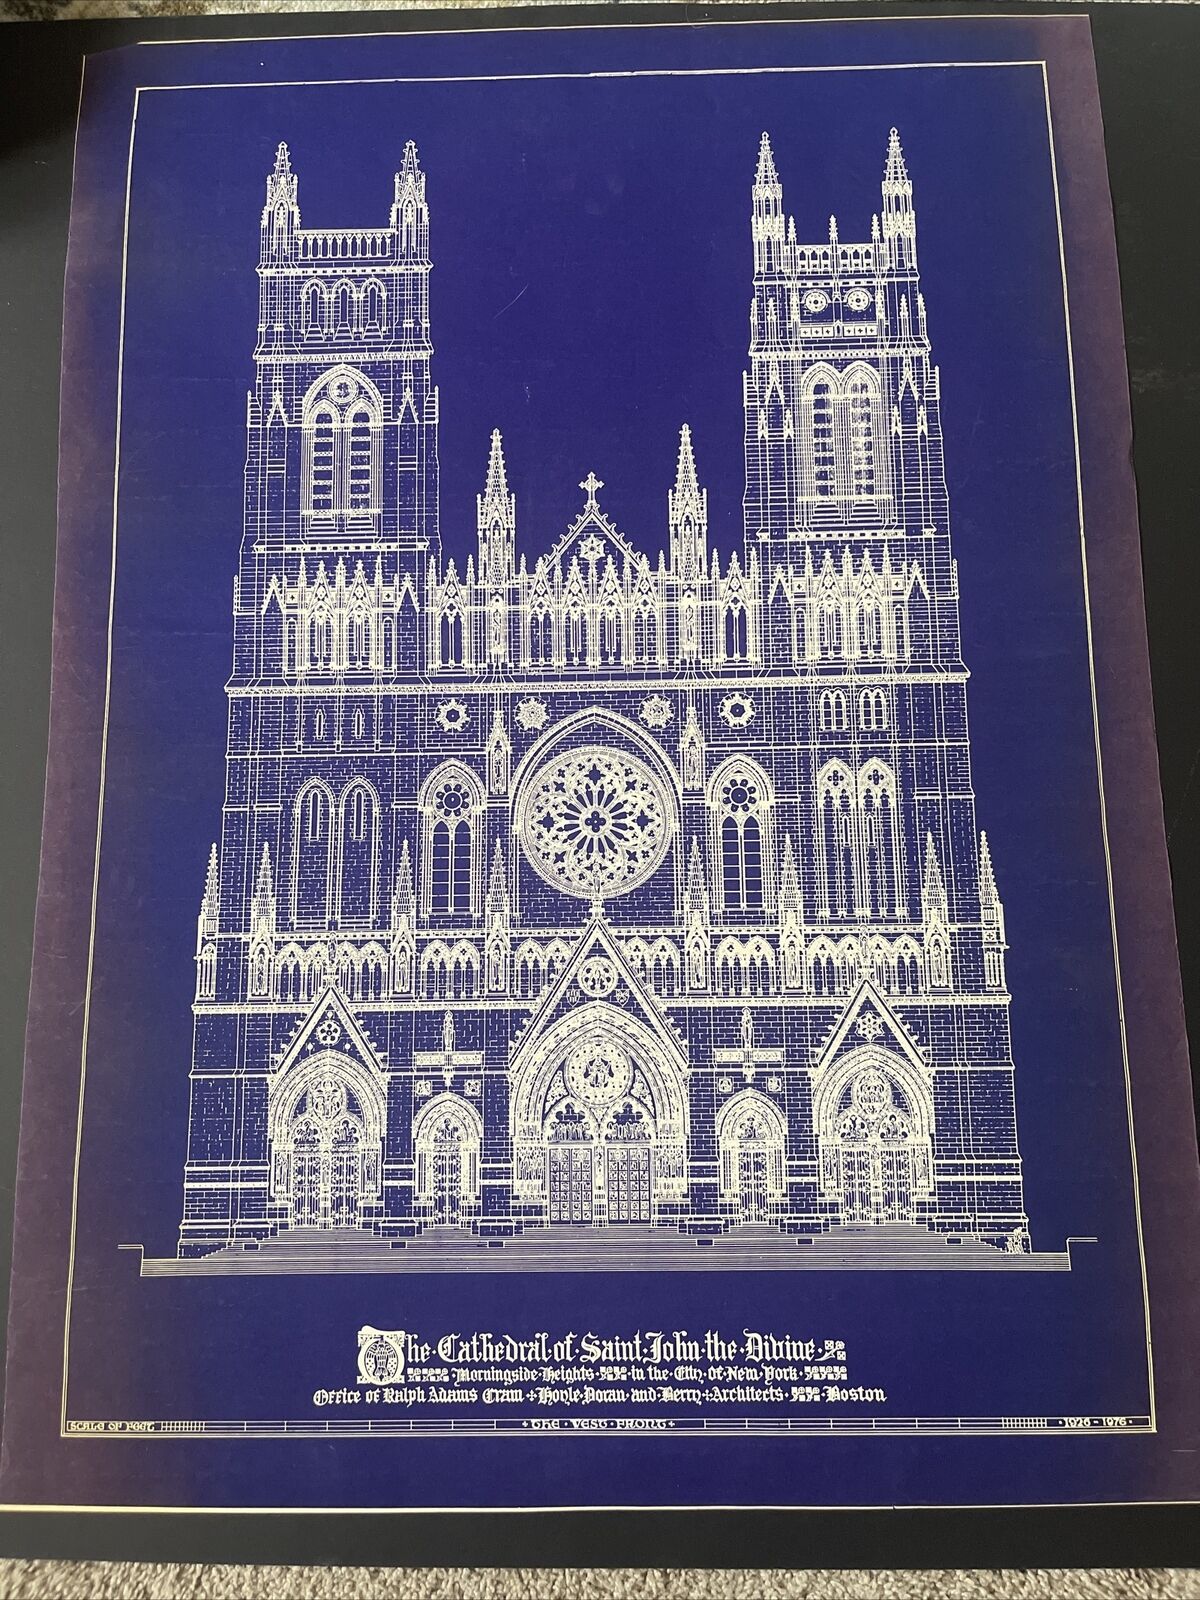 original blueprint poster of the cathedral of saint john the divine 1926-1976